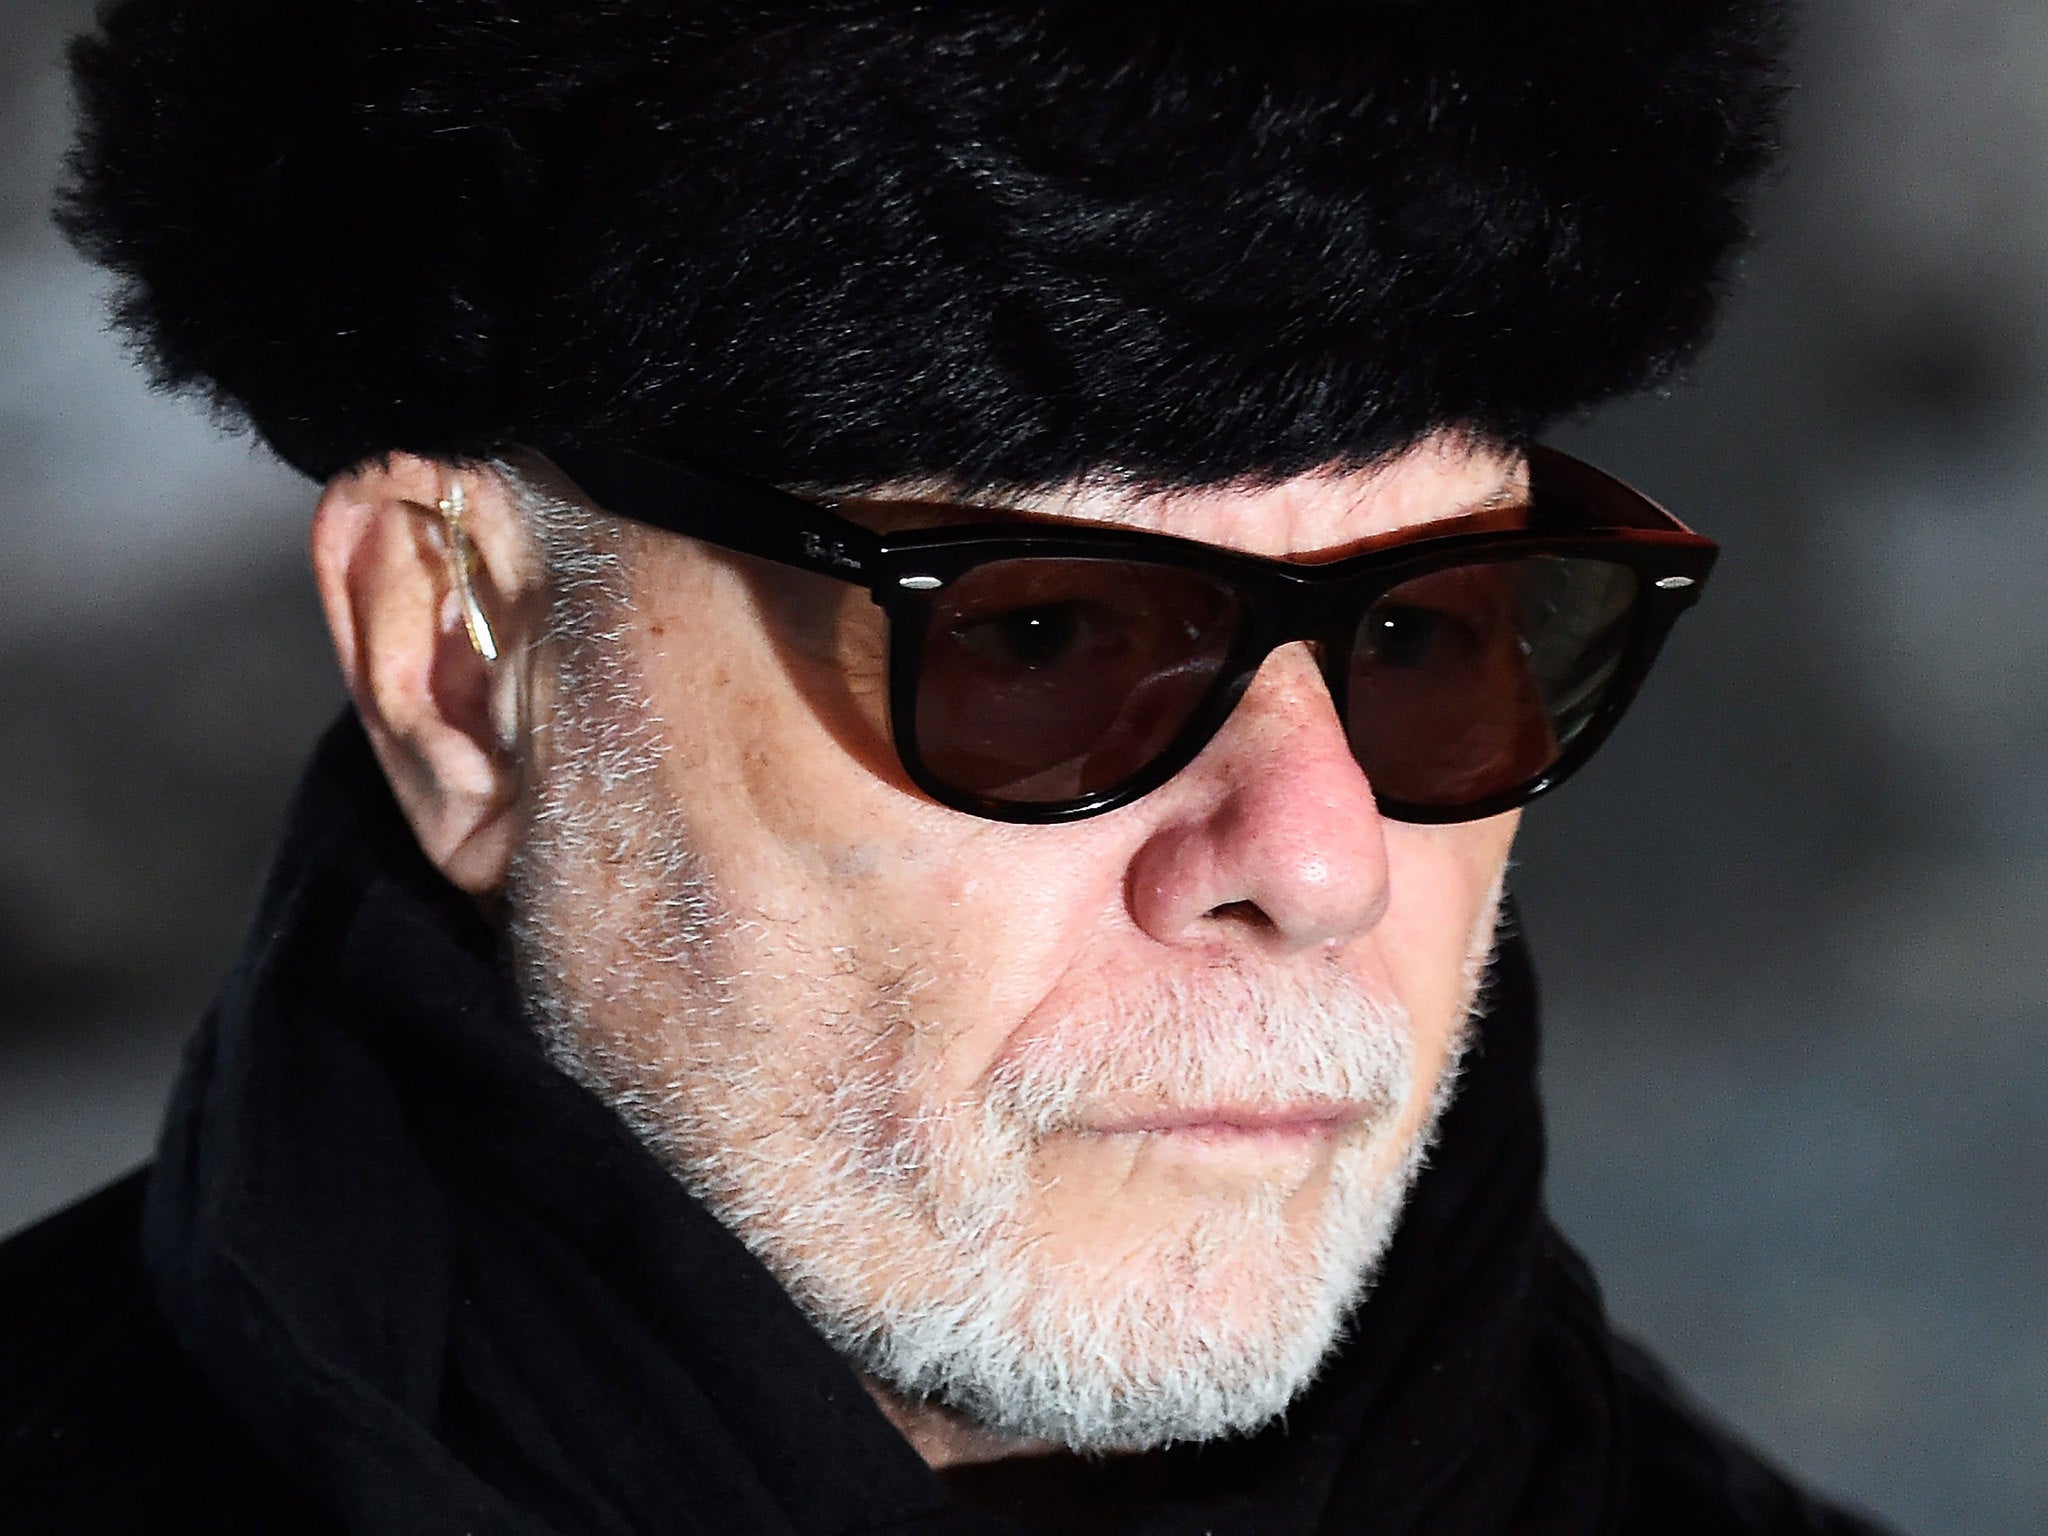 Gary Glitter arriving to Southwark Crown Court today appearing on charges relating to historic sex offenses against two young girls. The jury found him guilty.